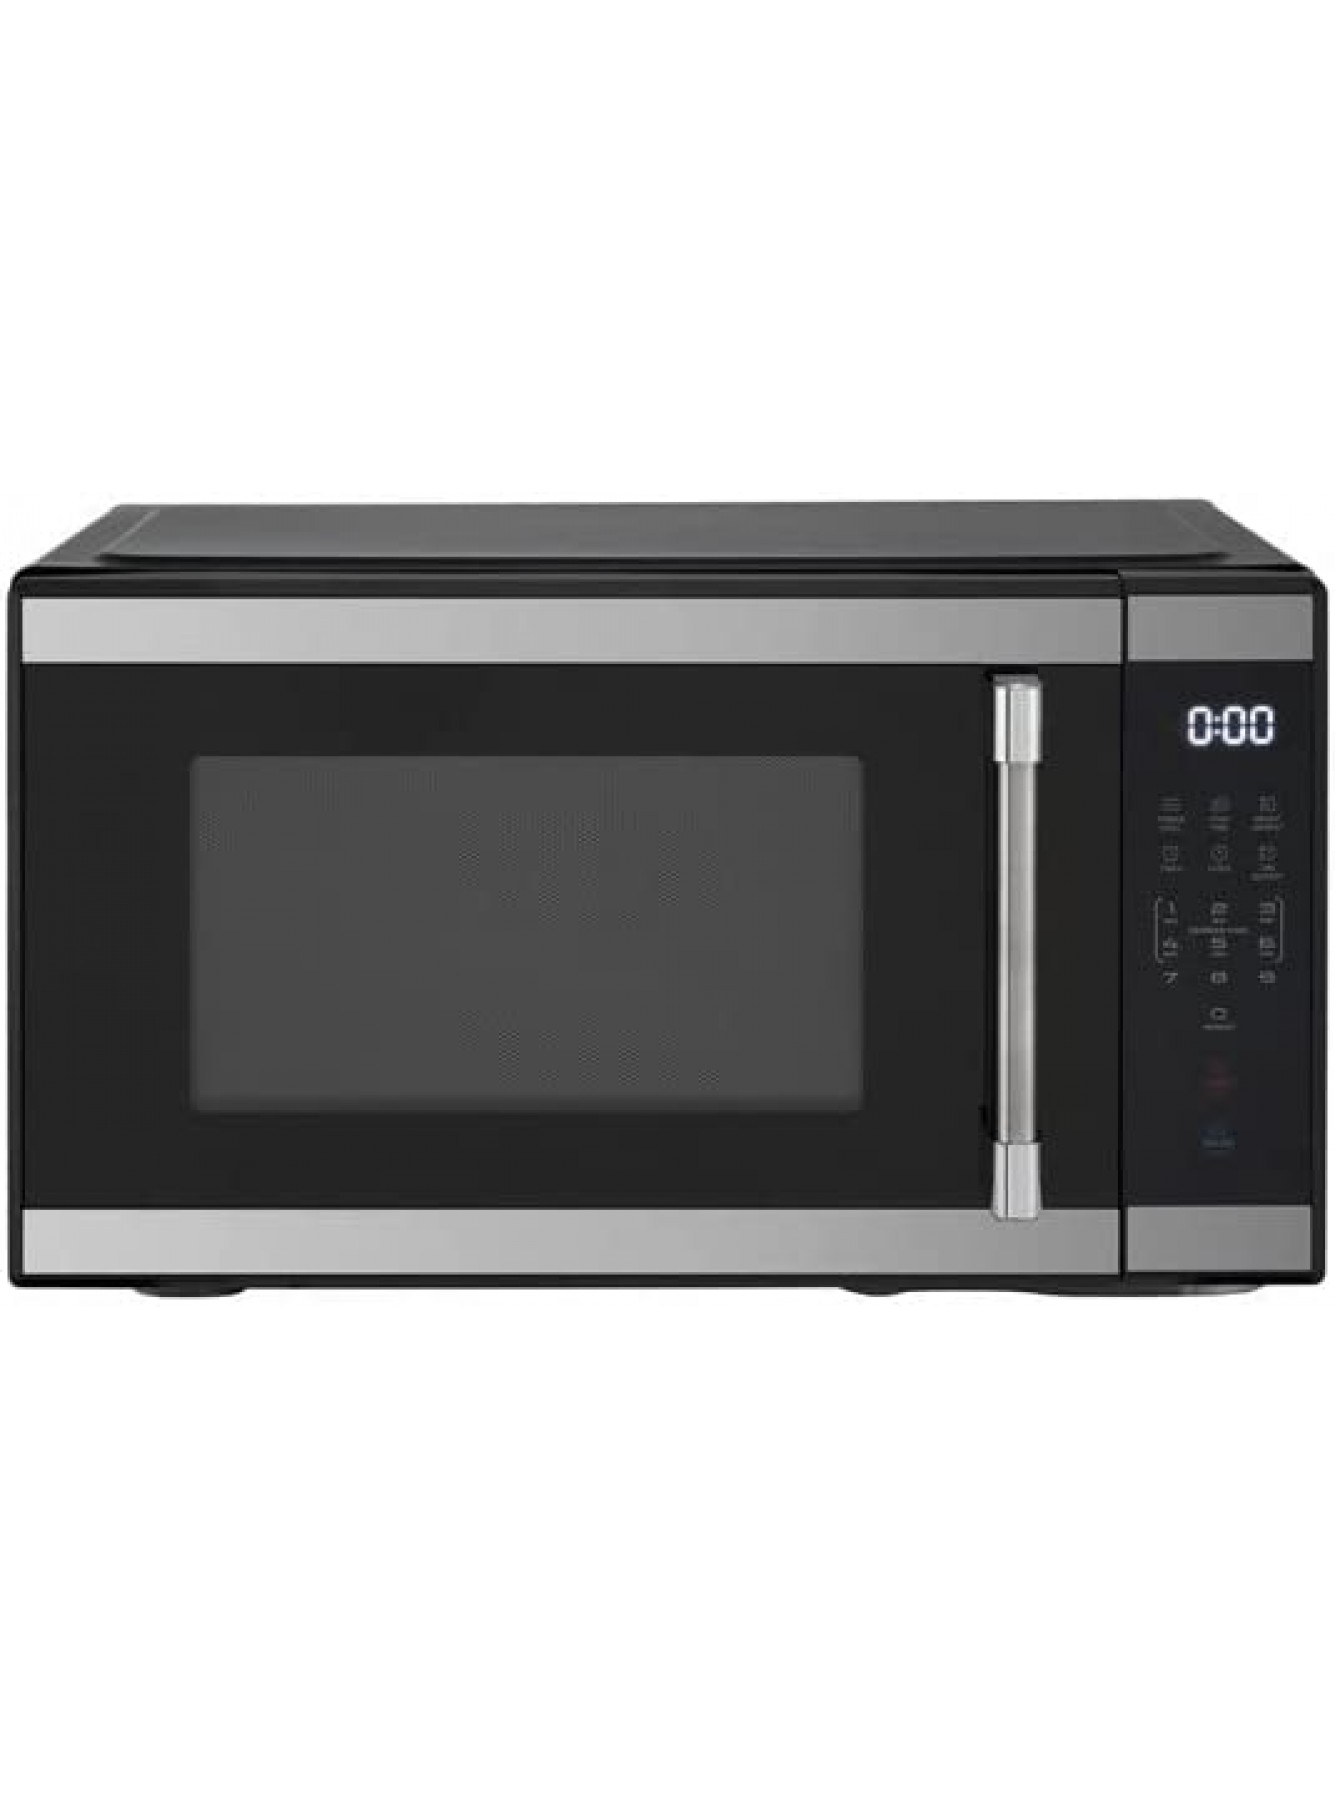 1.1 Cu. ft. 1000 W Mid Size Microwave Oven 1000W Stainless Steel,20.60 x 16.50 x 11.80 Inches B0B2WB5JCS